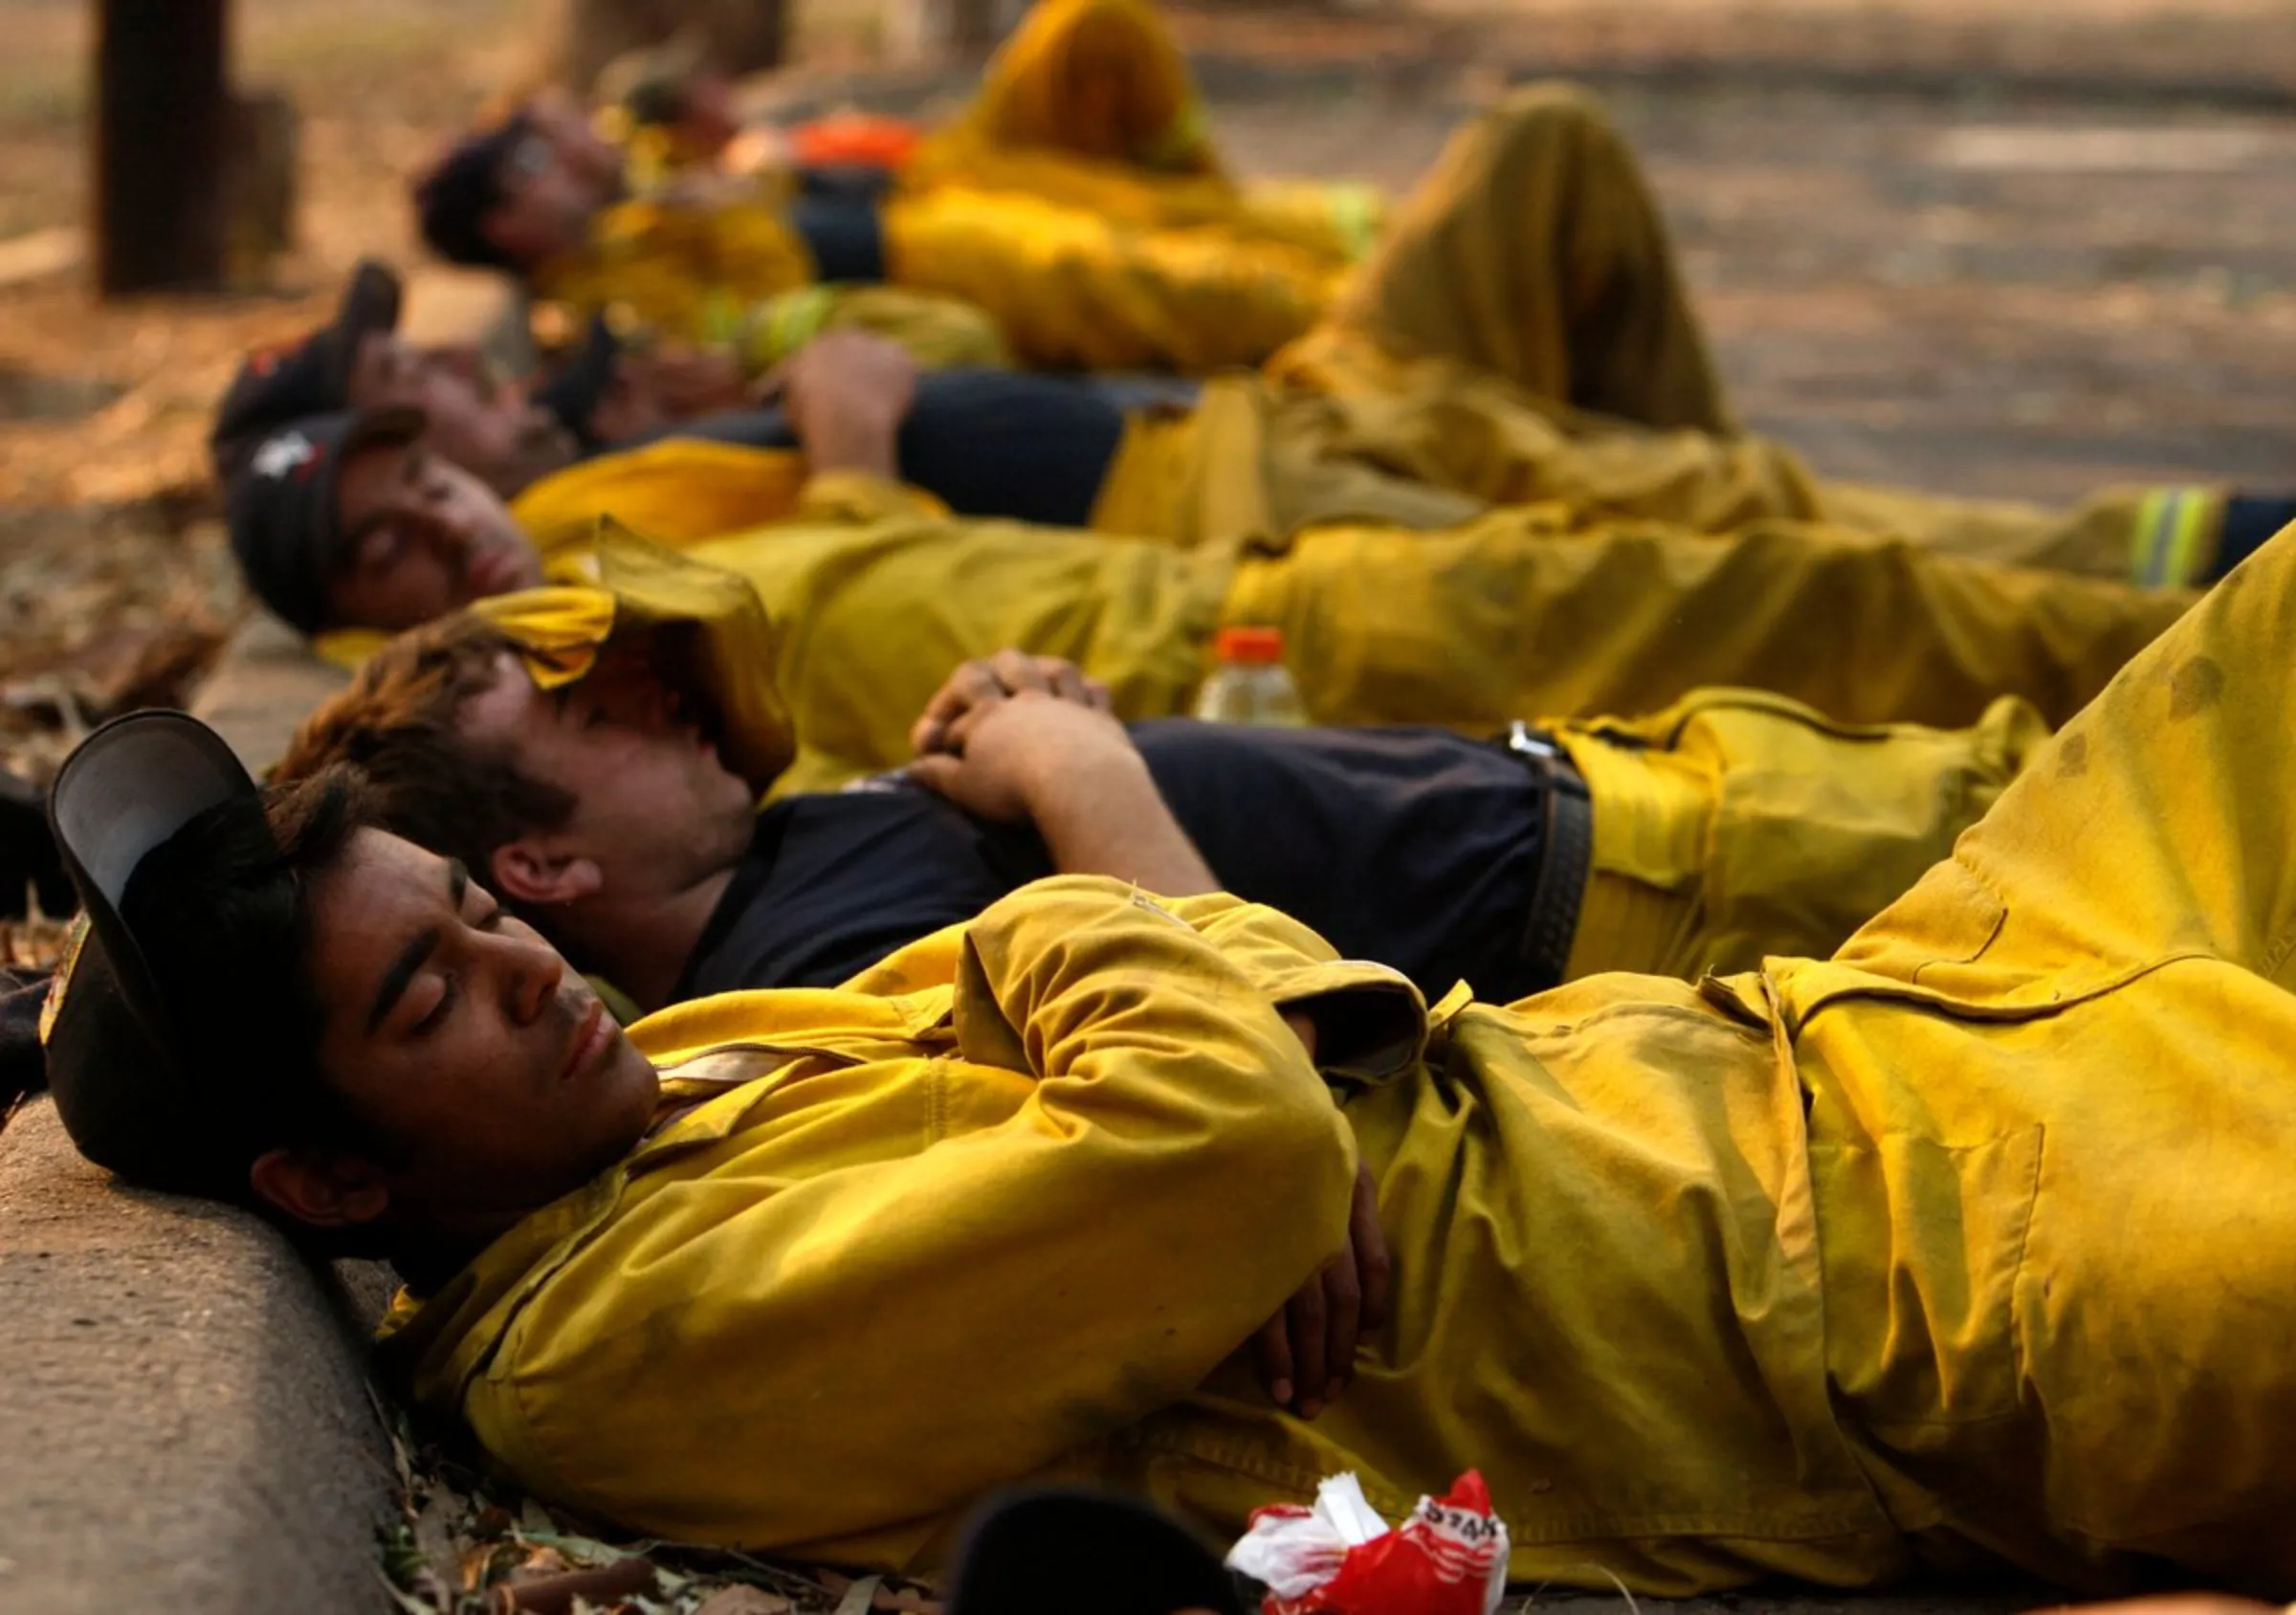 Firefighters sleep by the roadside after fighting fires in Lake Hodges, near San Diego, California, October 23, 2007. Relentless wildfires forcing the largest evacuations in California's modern history raged into a fourth day on Wednesday as 10,000 exhausted firefighters hoped for a break in the hot winds whipping the flames.